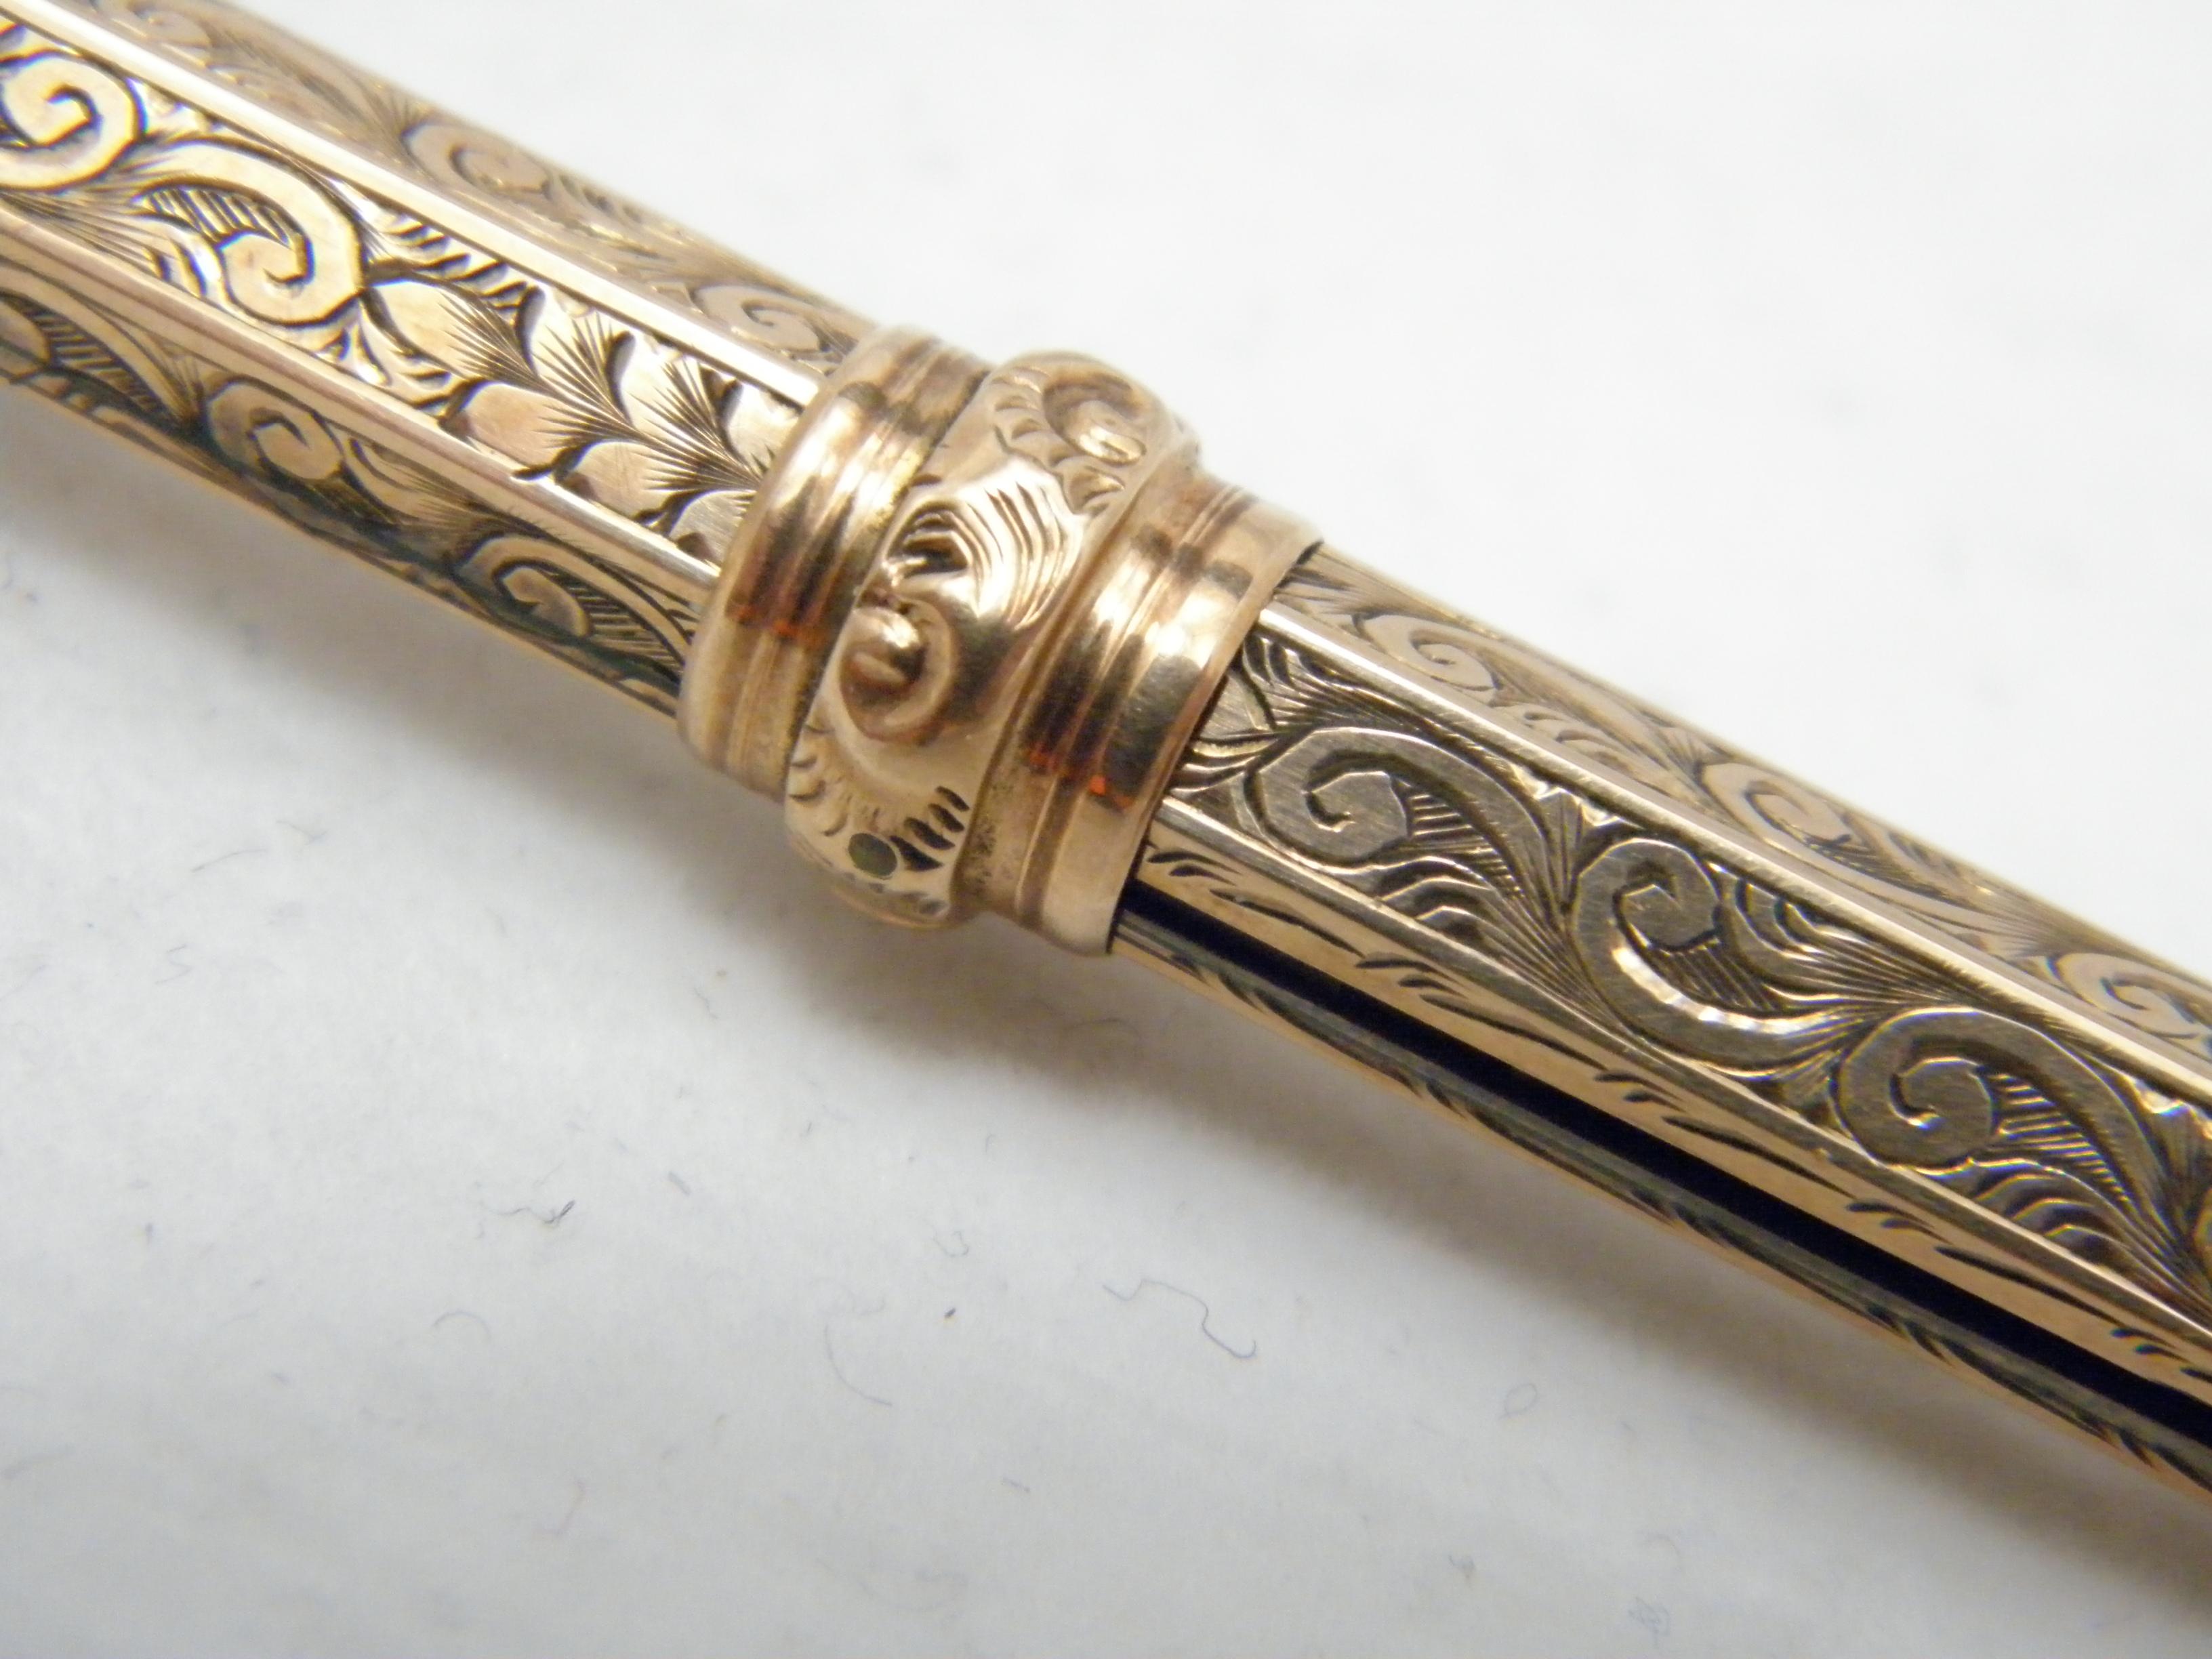 Antique 9ct Rose Gold Propelling Pencil c1850 375 Purity Massive Heavy 18.4g For Sale 1